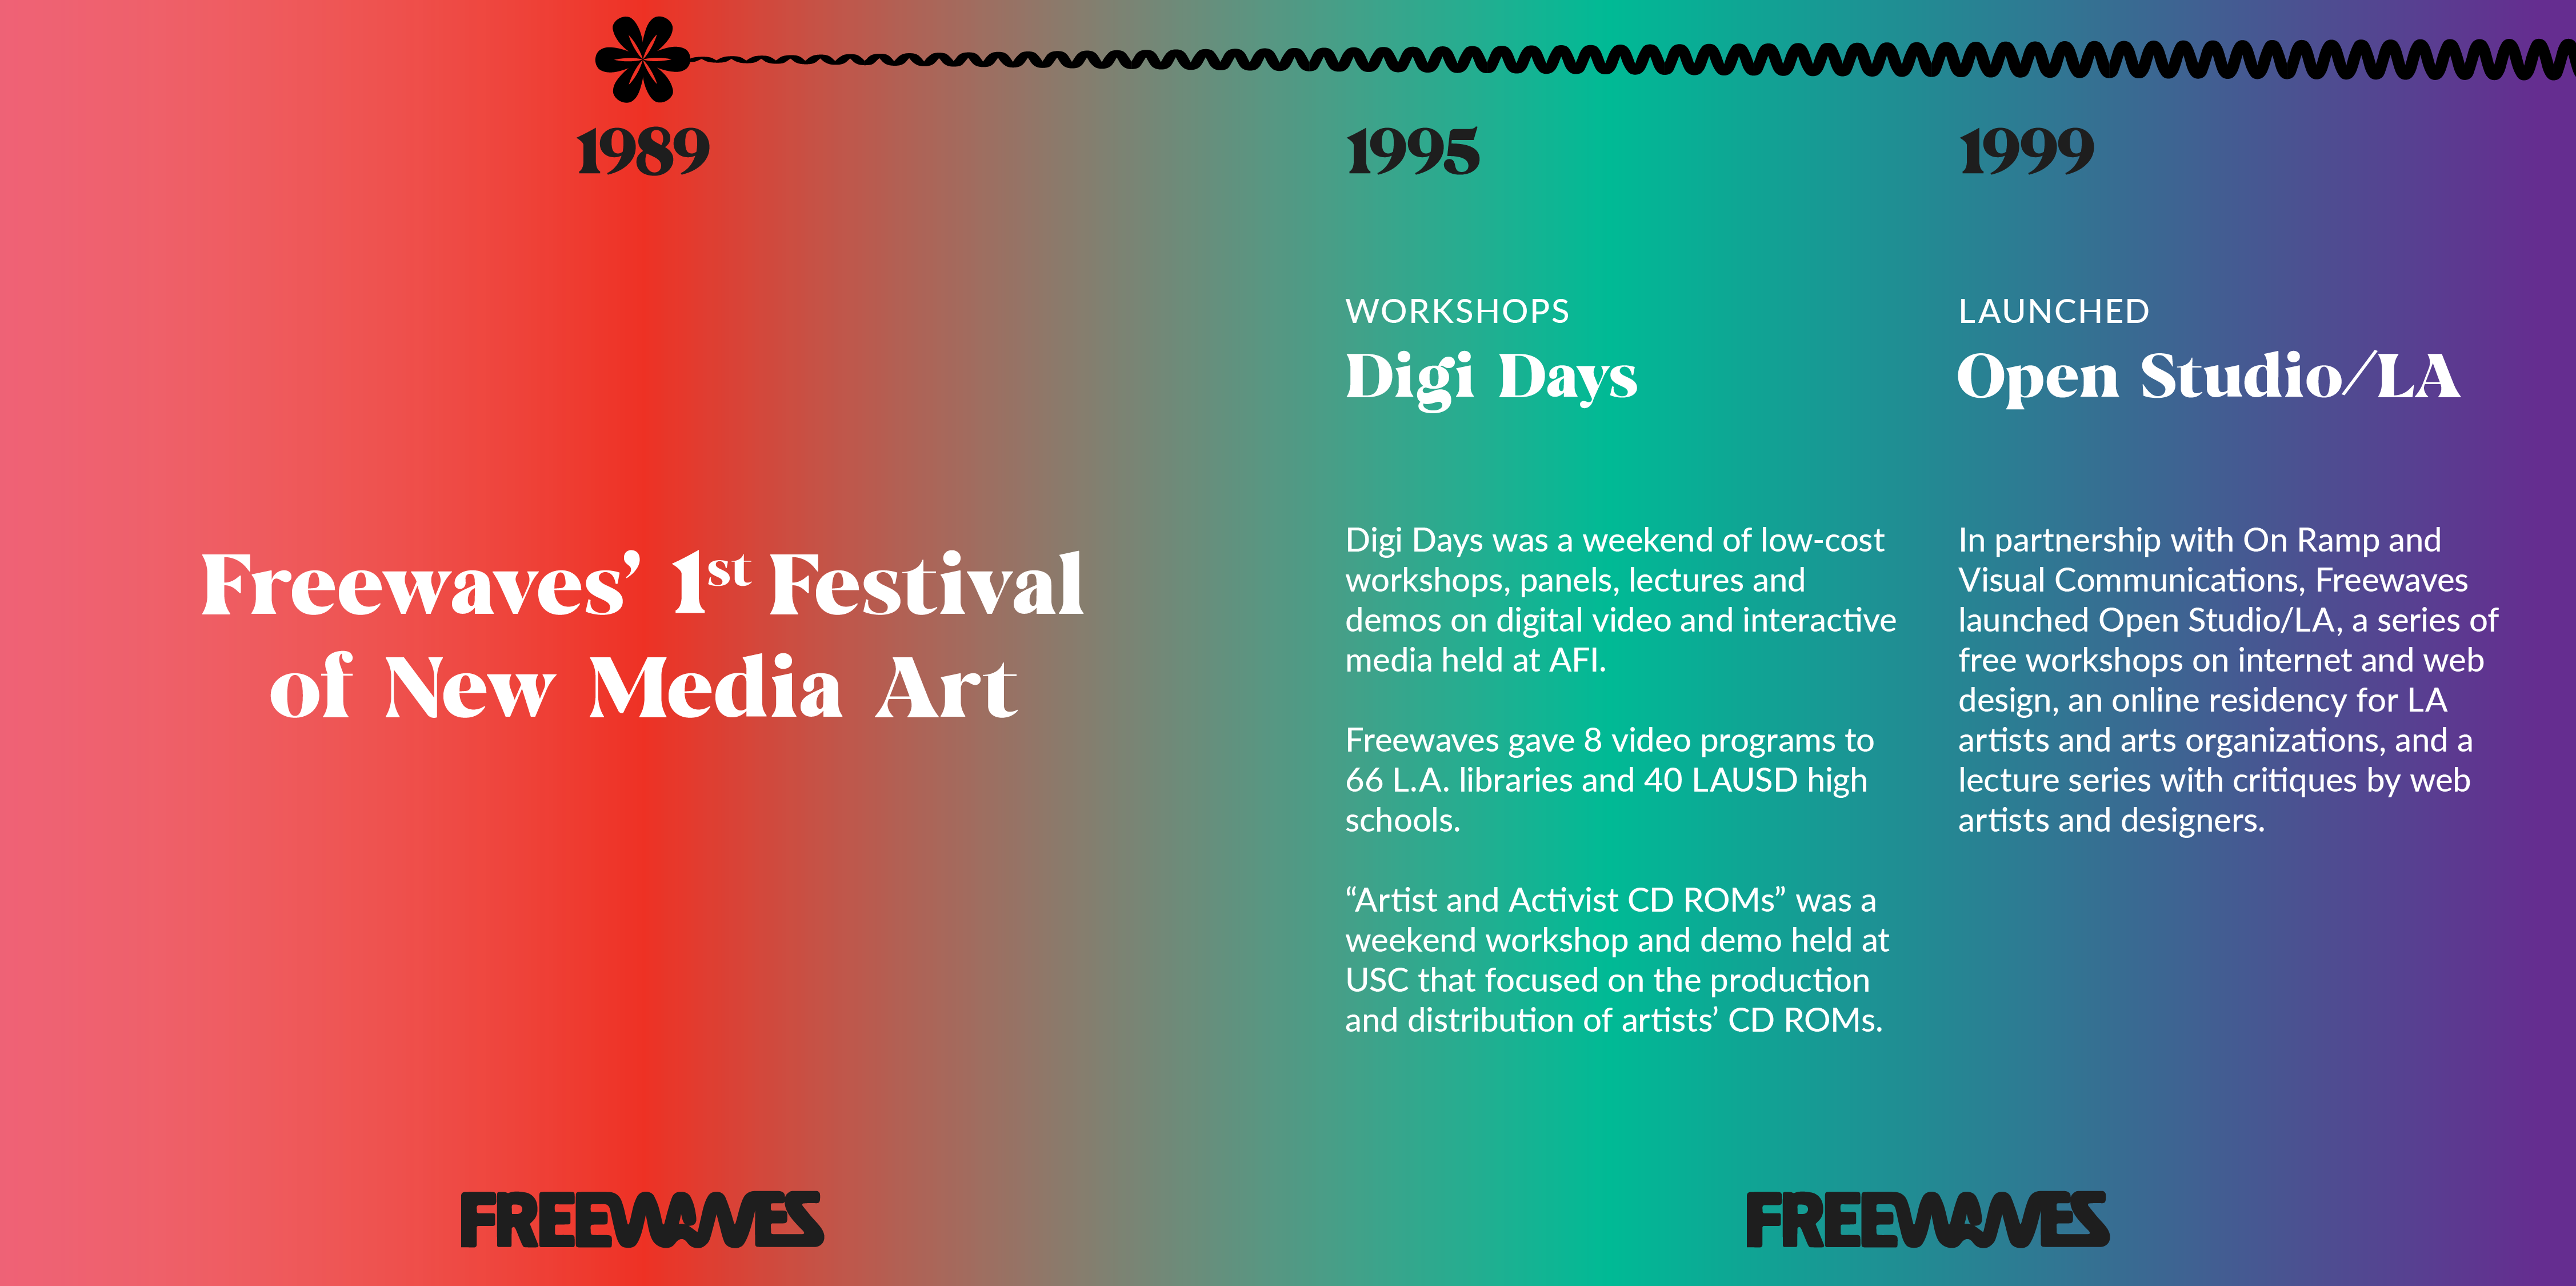 LA Freewaves timeline using text and colorful gradient backgrounds to represent the passing of time and different colorful programs over the years. The FREEWAVES black logo is repeated twice on the bottom, the years are at the top in black text, with the captions in white text below its corresponding year. 1989 - "Freewaves’ 1st Festival of New Media Art" 1995 - "WORKSHOPS - Digi Days - Digi Days was a weekend of low-cost workshops, panels, lectures and demos on digital video and interactive media held at AFI. Freewaves gave 8 video programs to 66 L.A. libraries and 40 LAUSD high schools. 'Artist and Activist CD ROMs' was a weekend workshop and demo held at USC that focused on the production and distribution of artists’ CD ROMs." 1999 - "Launched - Open Studio/LA - In partnership with On Ramp and Visual Communications, Freewaves launched Open Studio/LA, a series of free workshops on internet and web design, an online residency for LA artists and arts organizations, and a lecture series with critiques by web artists and designers."